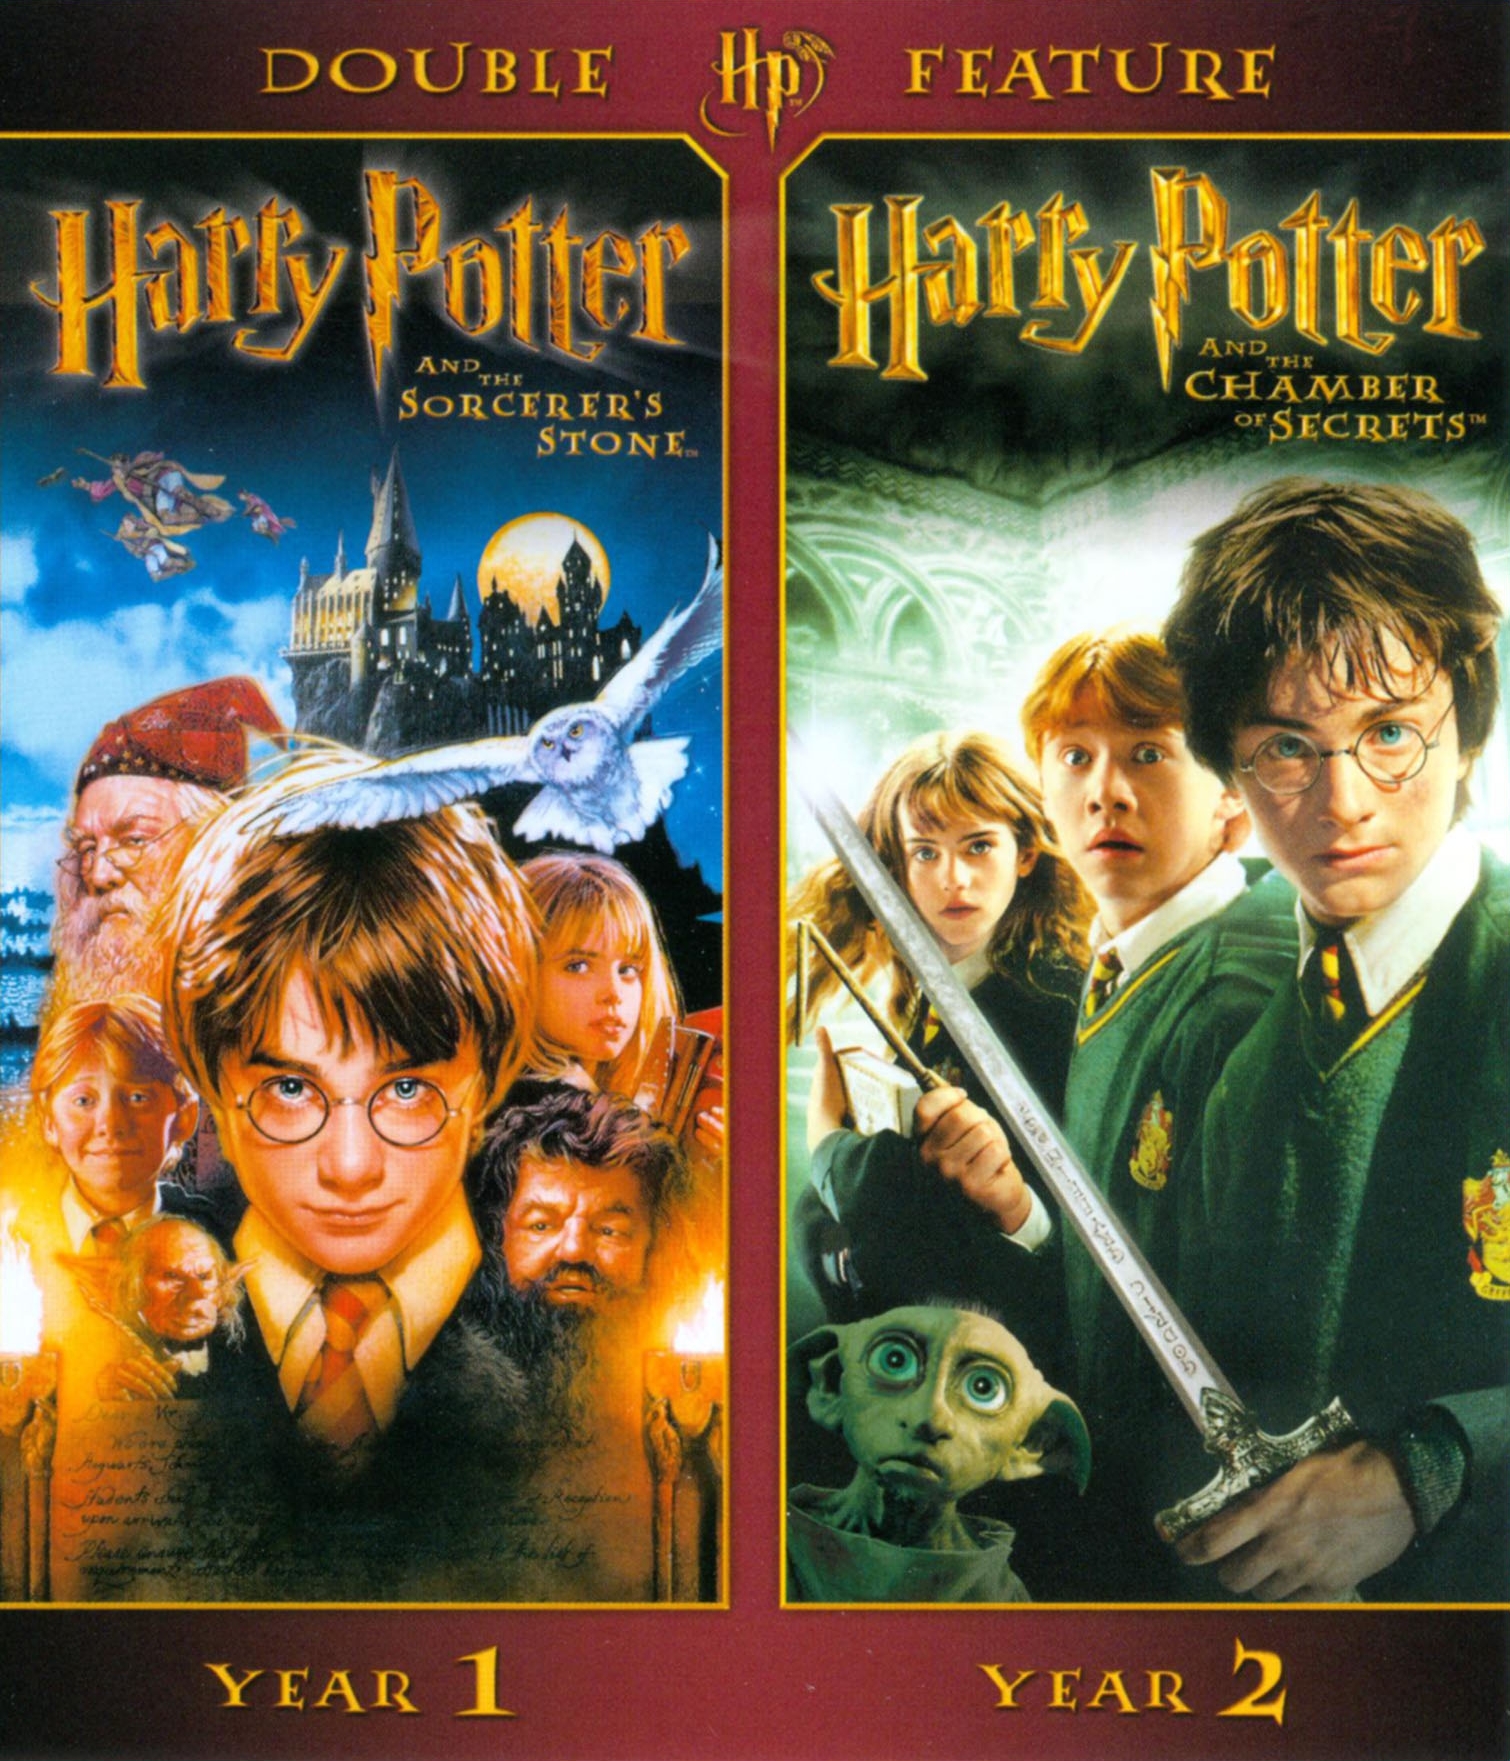 Harry Potter and the Deathly Hallows – Part 1 - Wikipedia